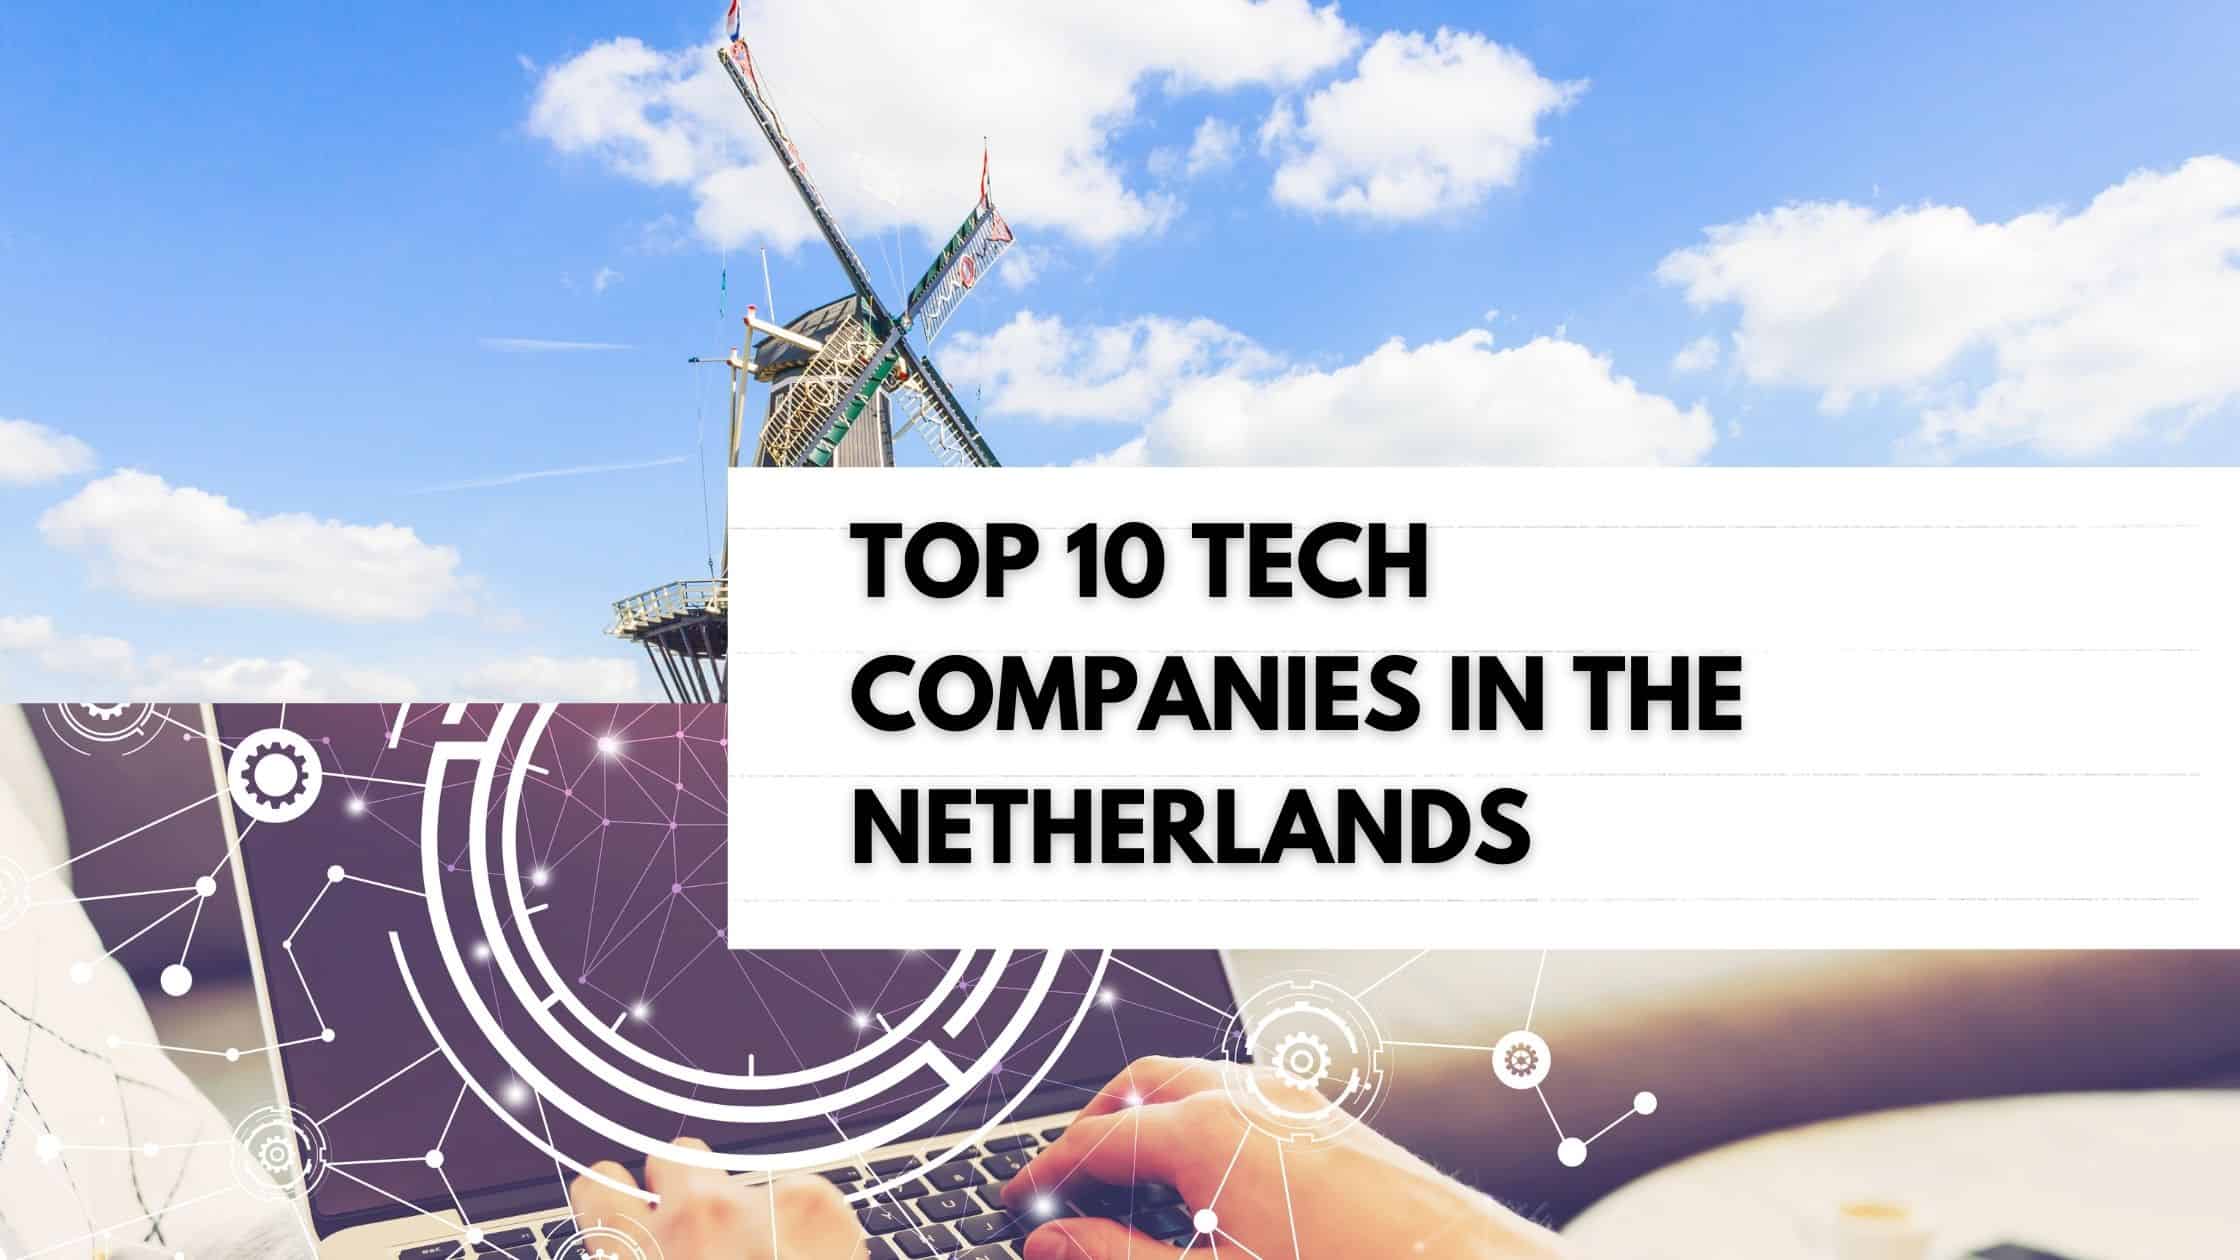 Top 10 tech companies in the Netherlands